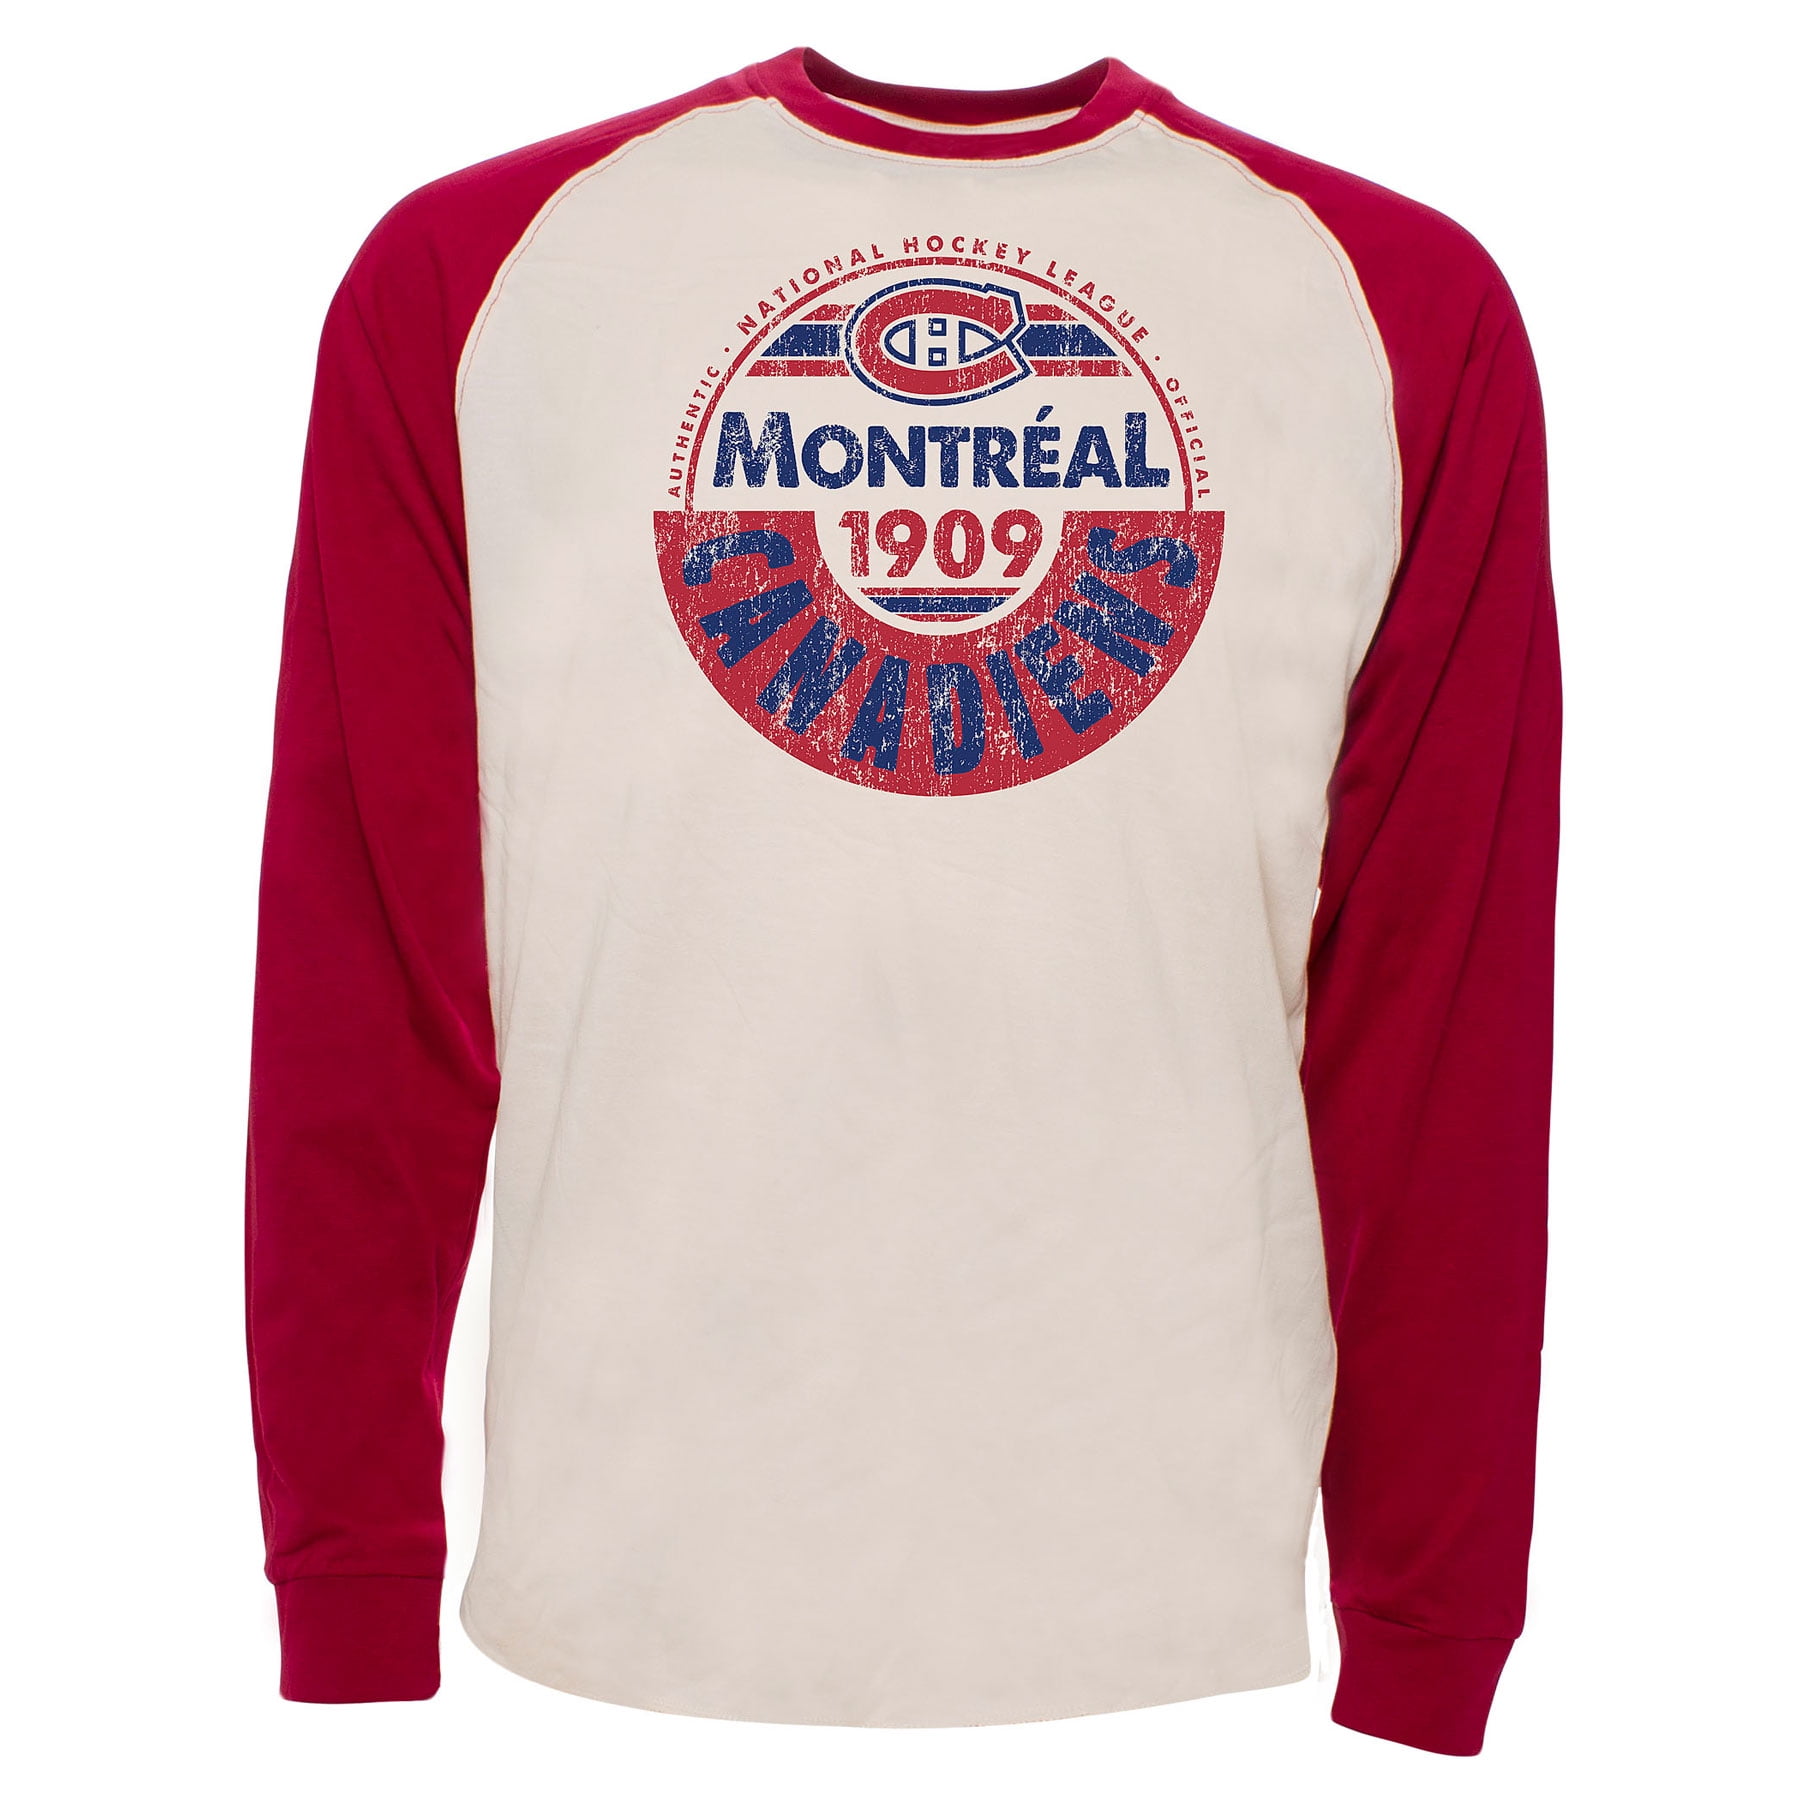 Montreal Canadiens T Shirt : Montreal Canadiens T Shirt Alstyle Mens ...